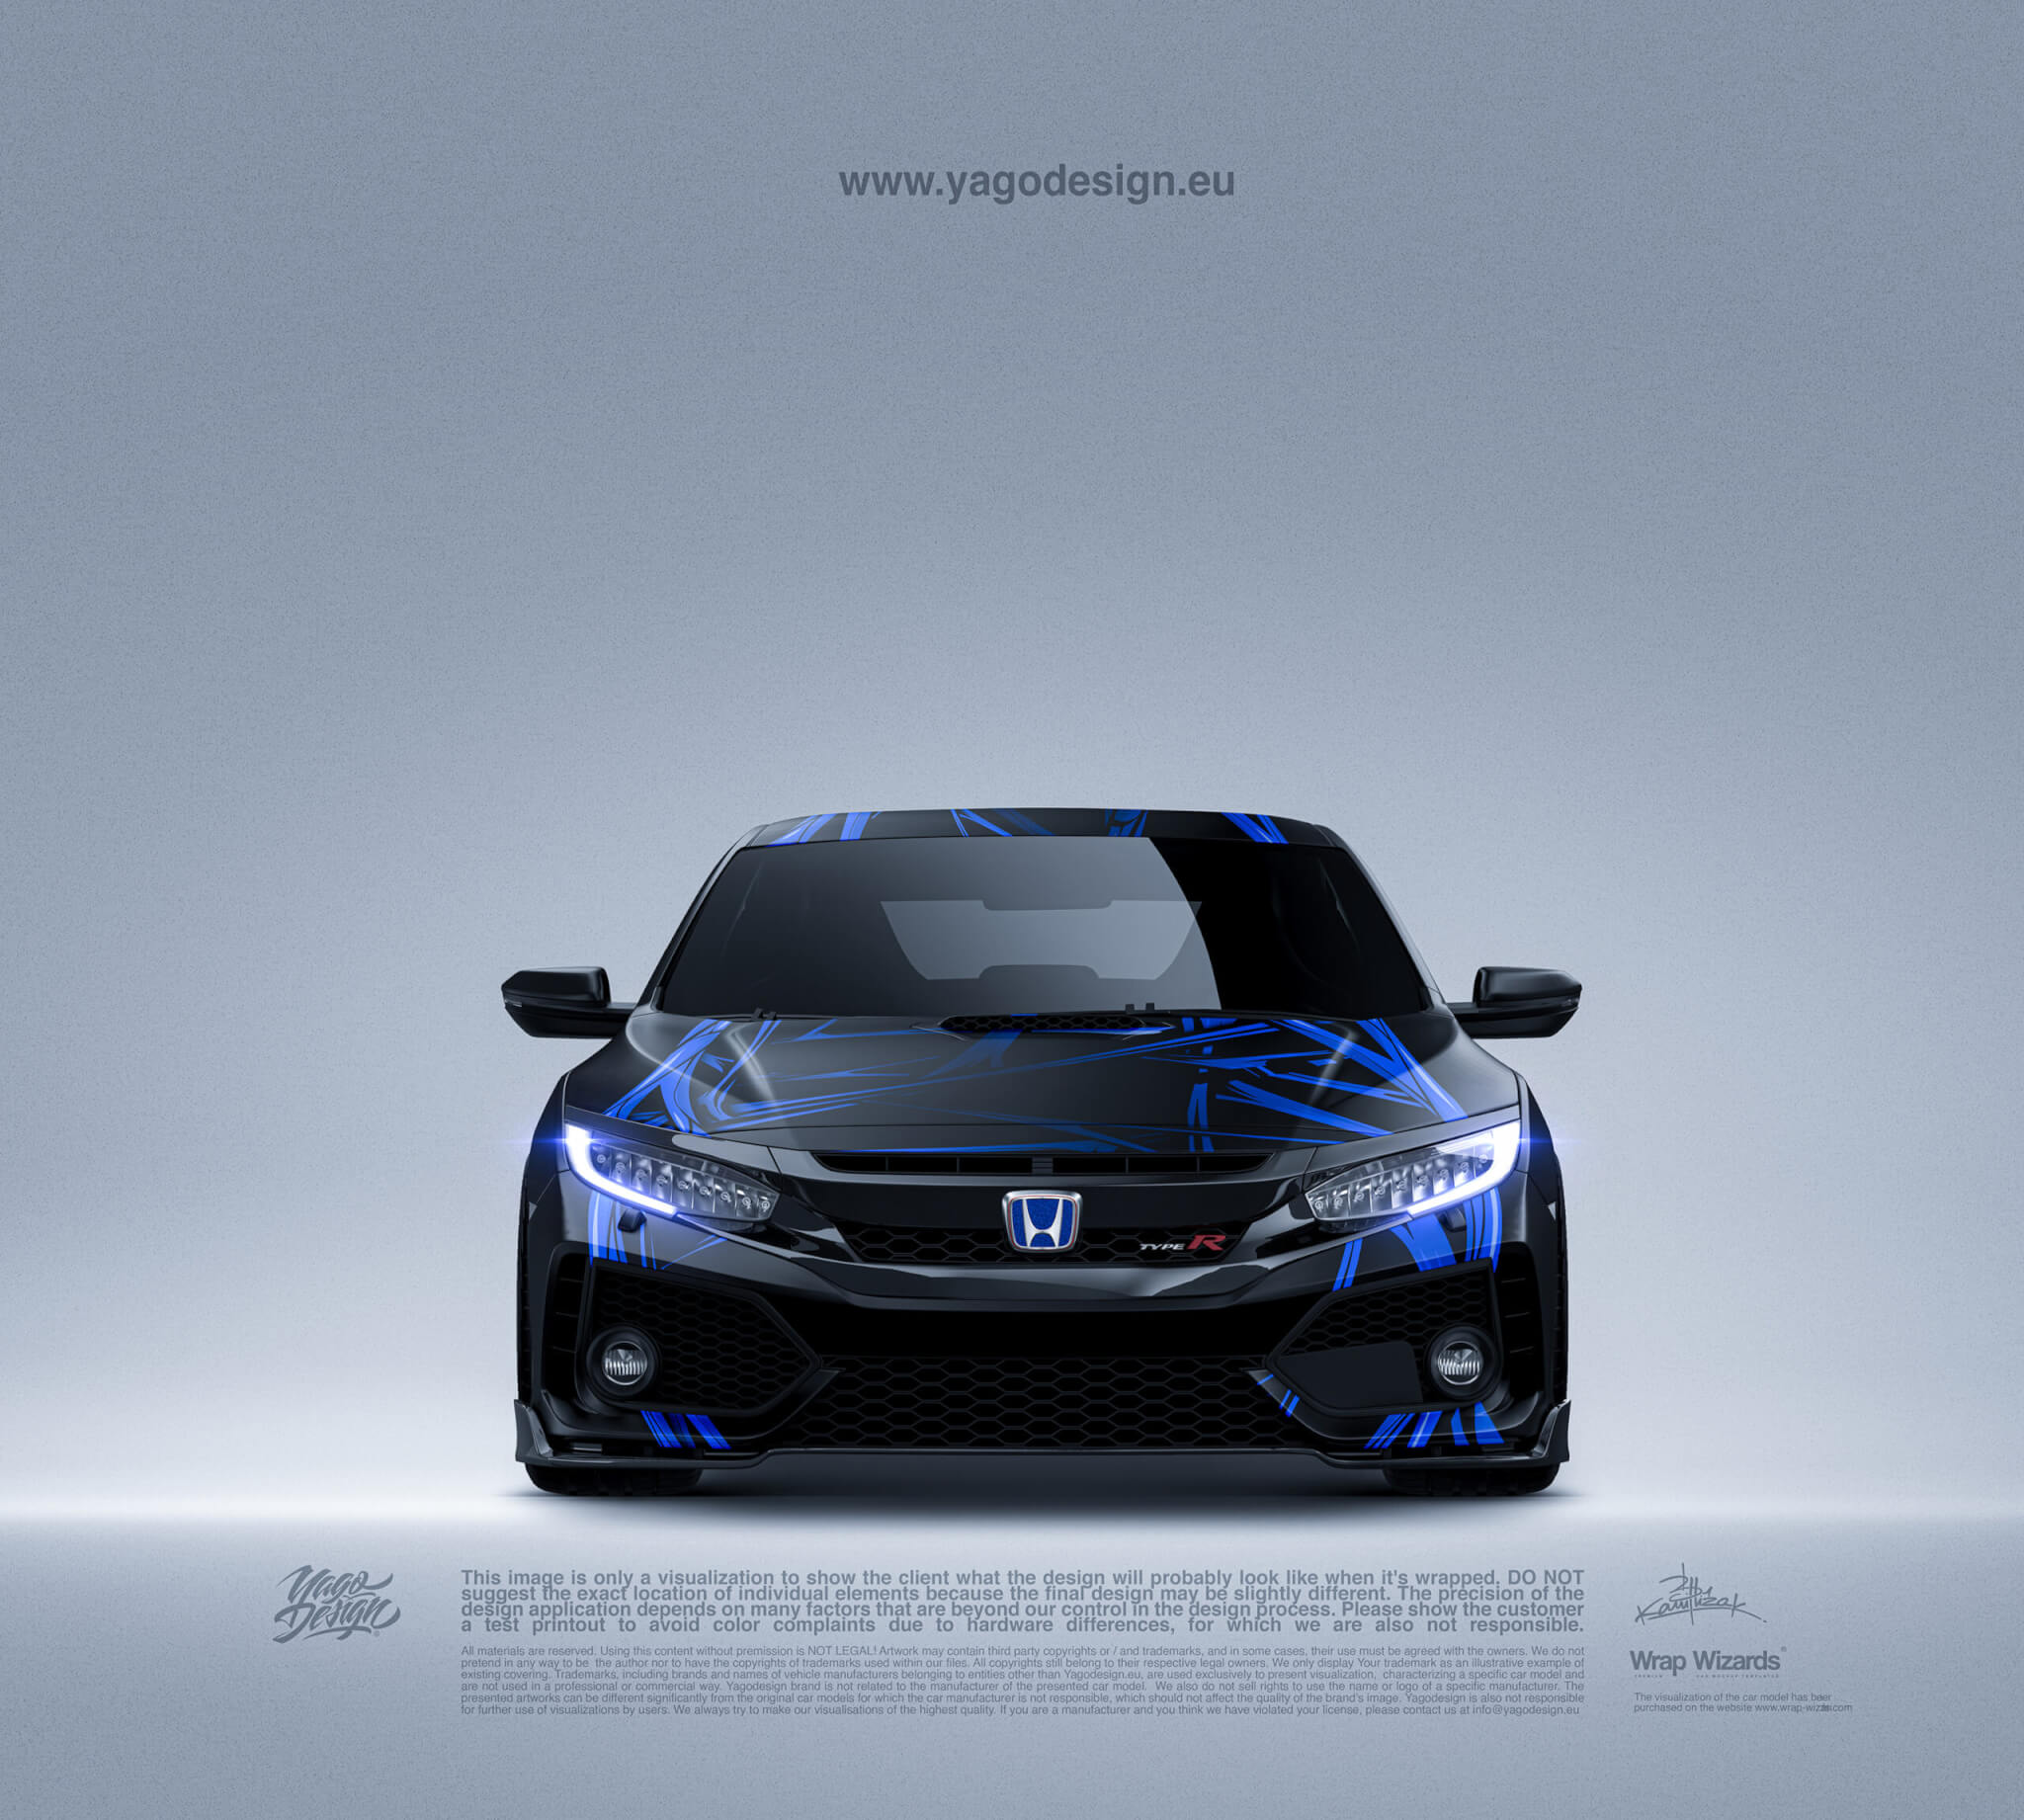 HONDA-CIVIC-TYPE-R-2018-SONIC-FRONT-BY-YAGODEIGN